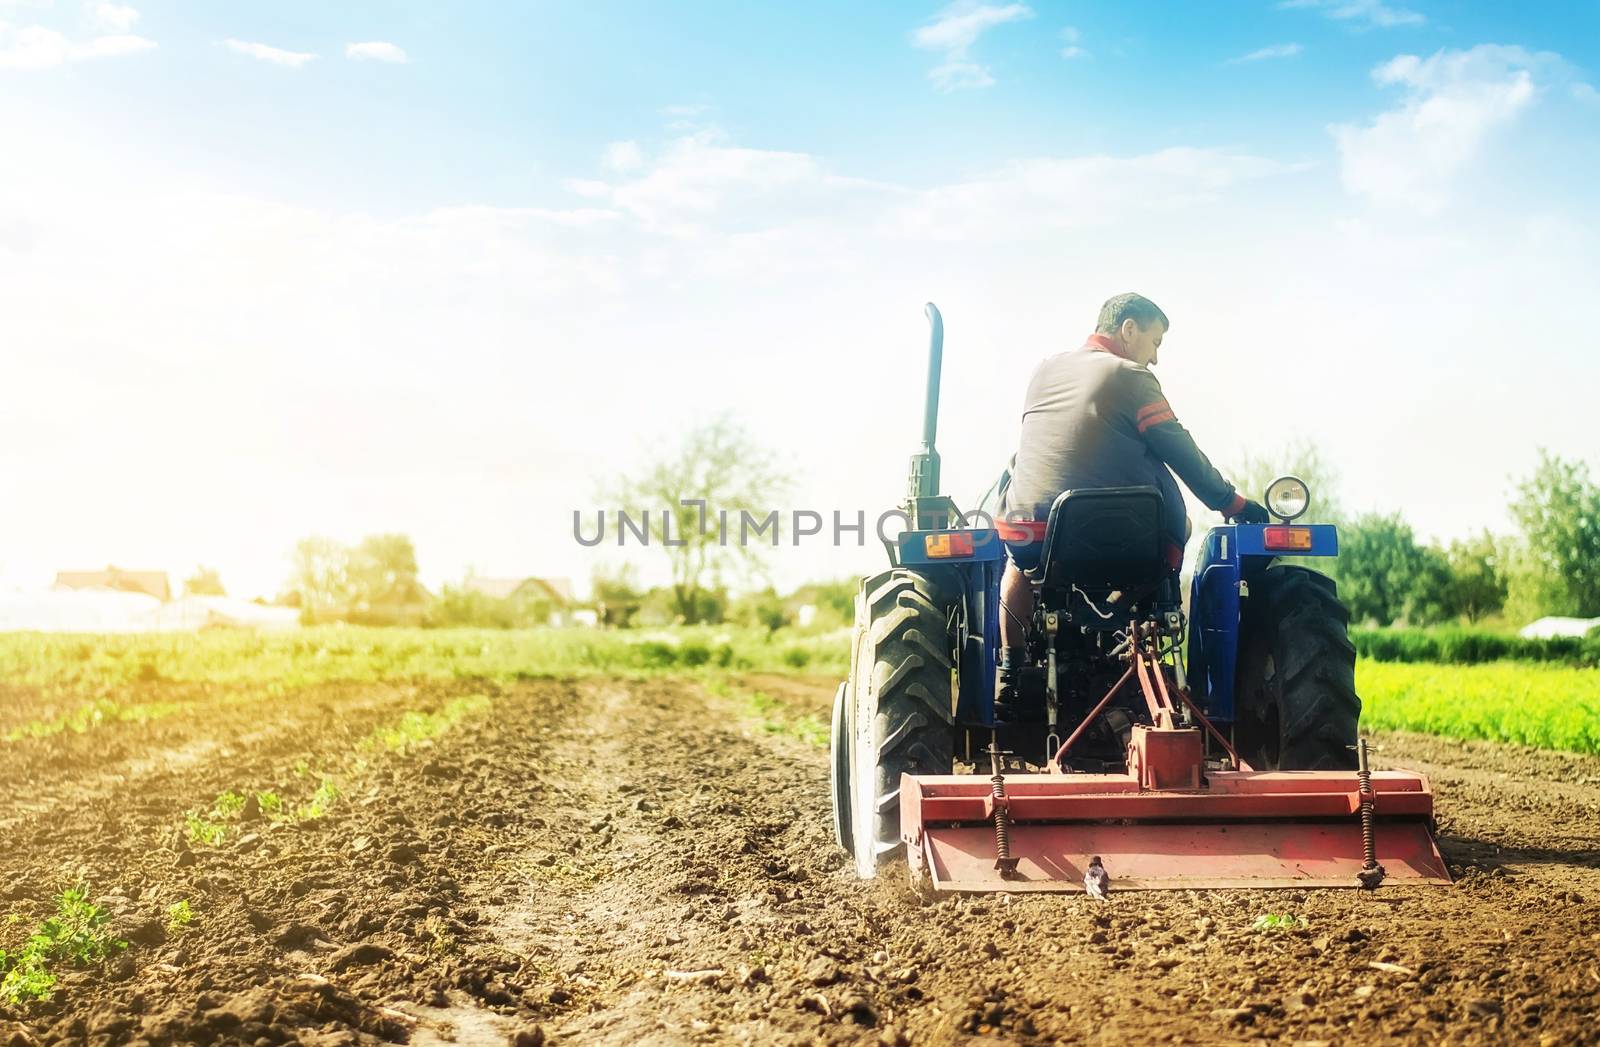 Farmer on a tractor with milling machine loosens, grinds and mixes soil. Cultivation technology equipment. Loosening the surface, cultivating the land for further planting. Farming and agriculture.